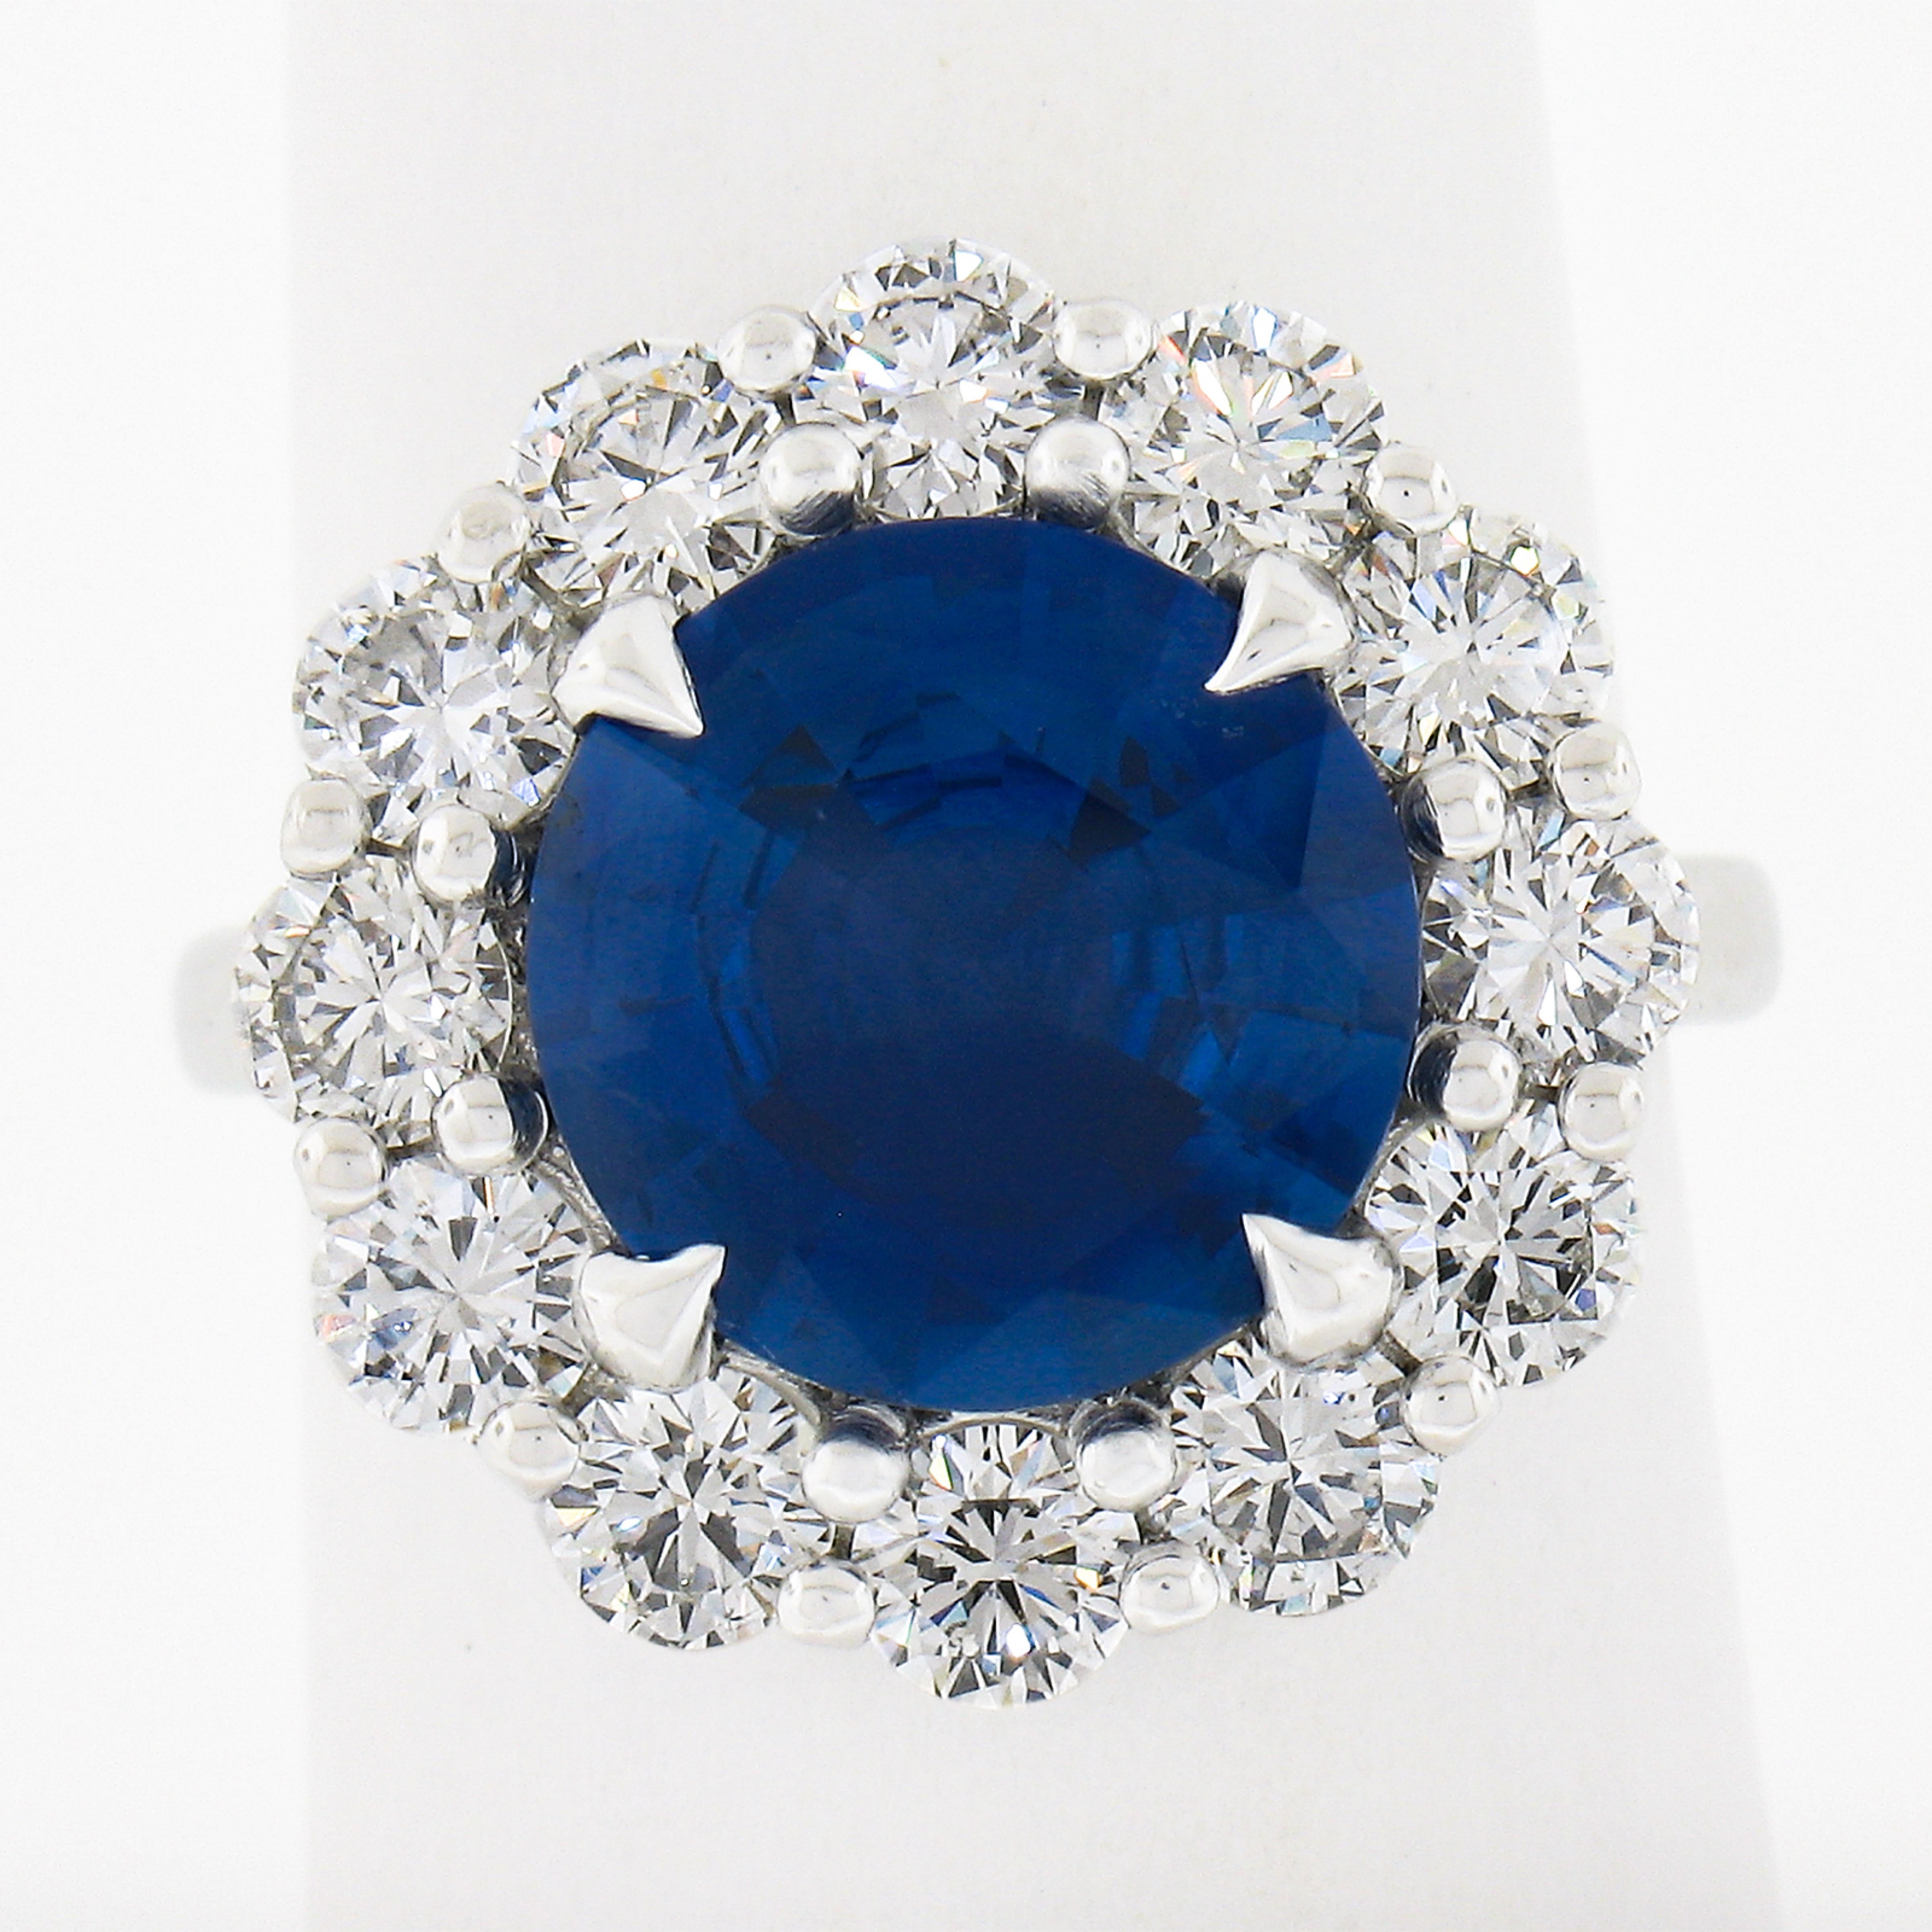 This jaw dropping statement ring is crafted in solid platinum and features a gorgeous, GIA certified, round brilliant cut sapphire set at the center of a magnificent diamond halo. The large sapphire weighs 4.55 carats and is a beautiful, super